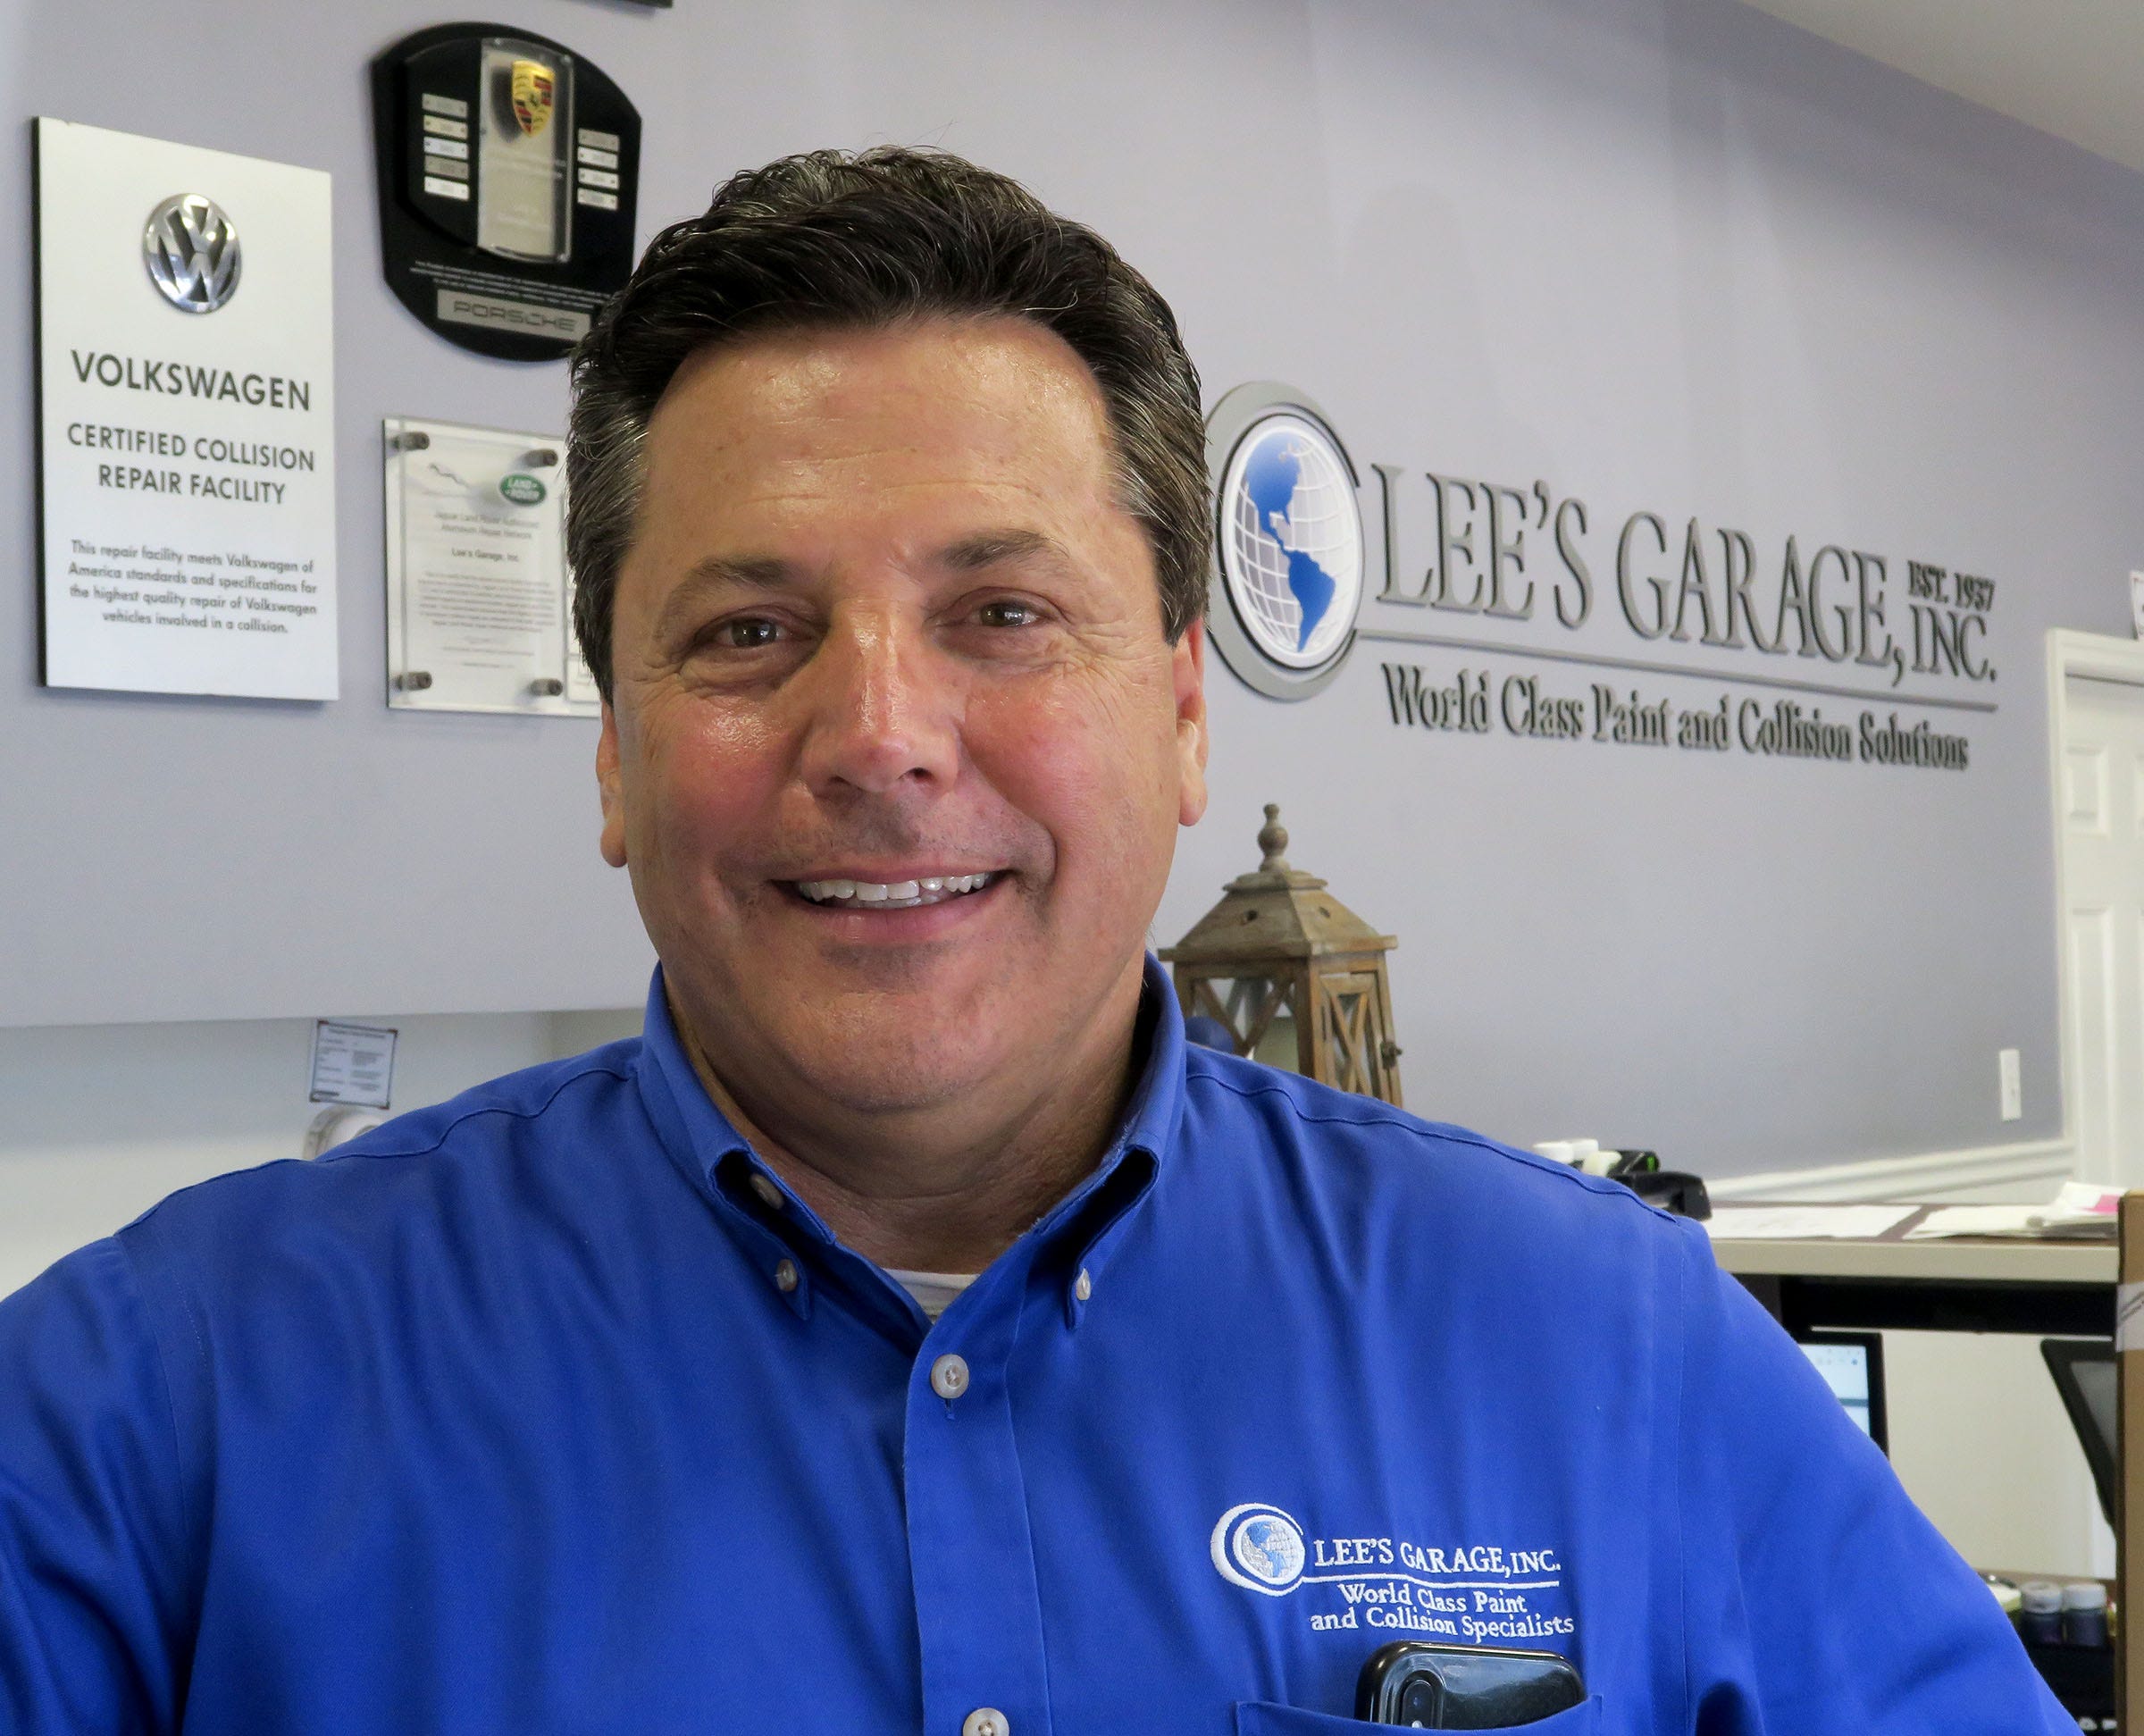 Lee's Garage owner learned the business by being an employee first